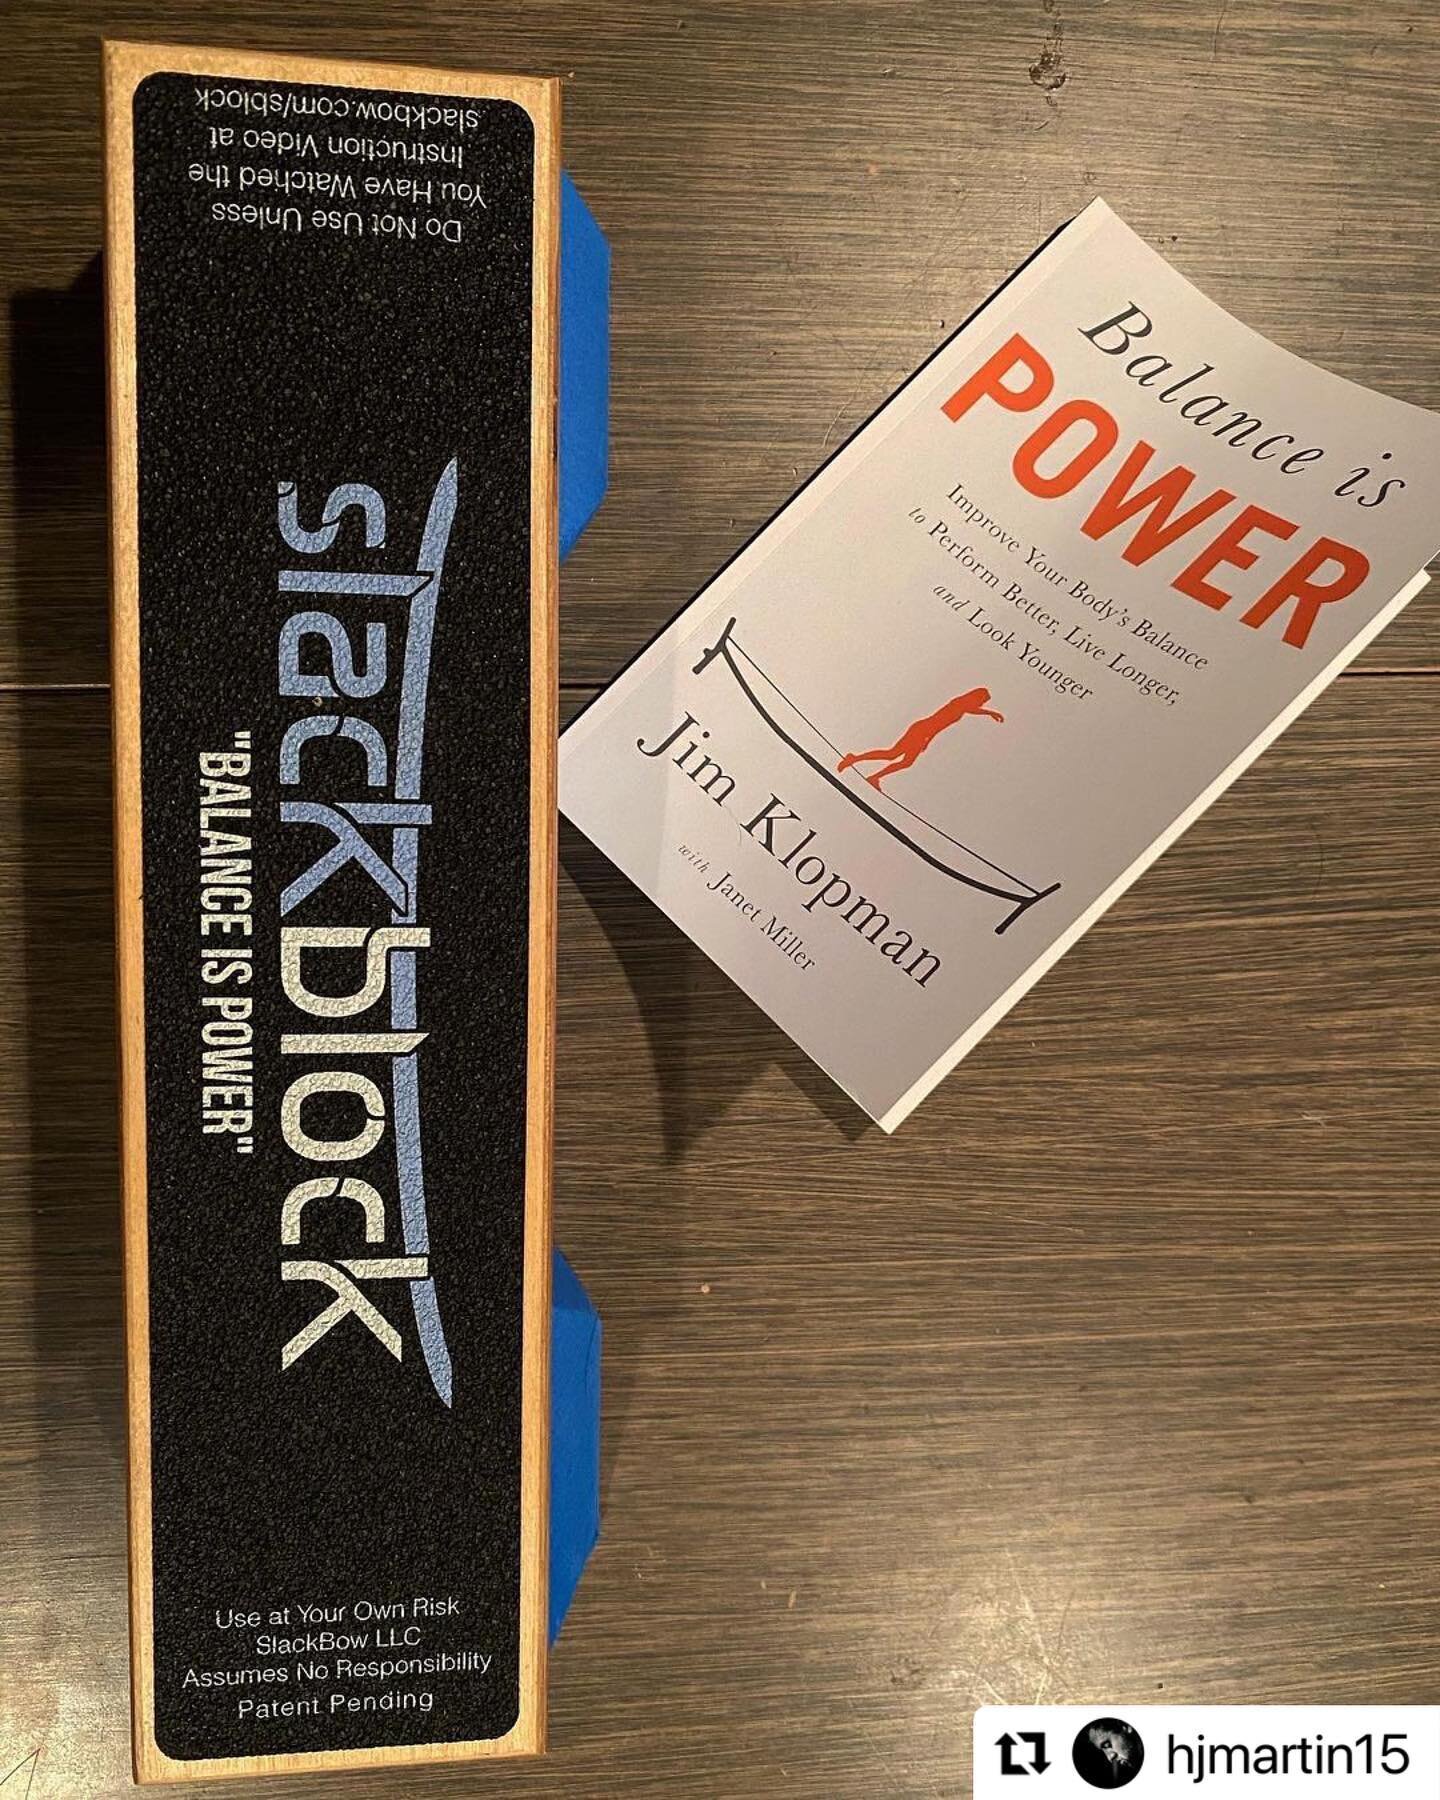 I had a nice conversation with @hjmartin Founder @themindstrongproject  Thank you for the lovely comments

・・・
Friday nights are for good reading and strong balance! Thank you for beautiful read @slackbow_balance and the Slack Bow to build up my game